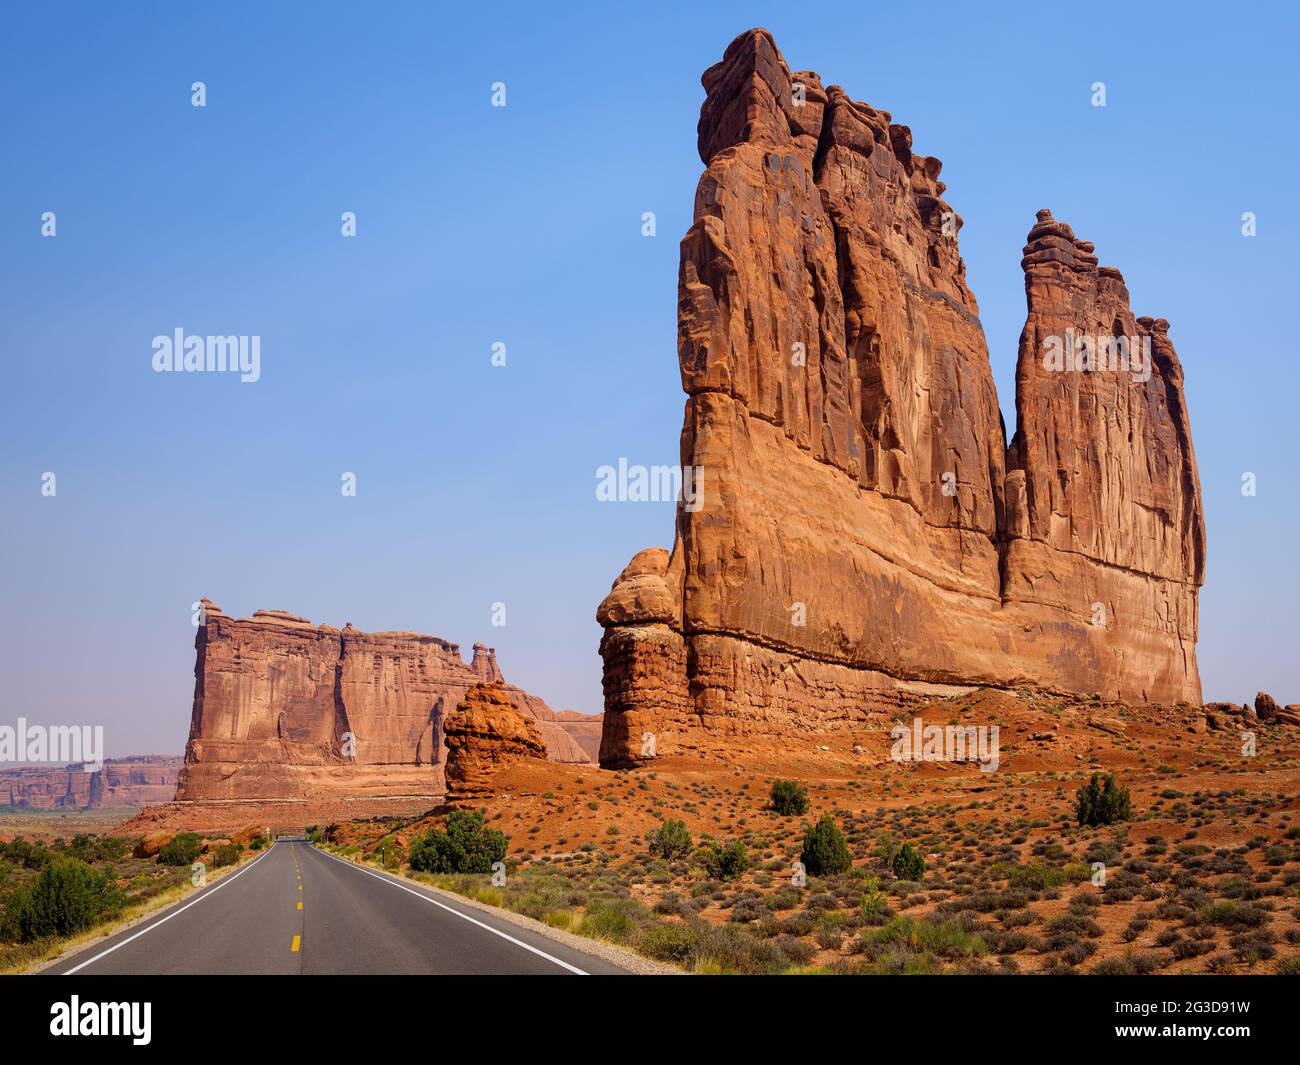 ARCHES NATIONAL PARK, UTAH - CIRCA AUGUST 2020: The Courthouse Towers and Tower of Babel in Arches National Park. A collection of tall stone columns i Stock Photo